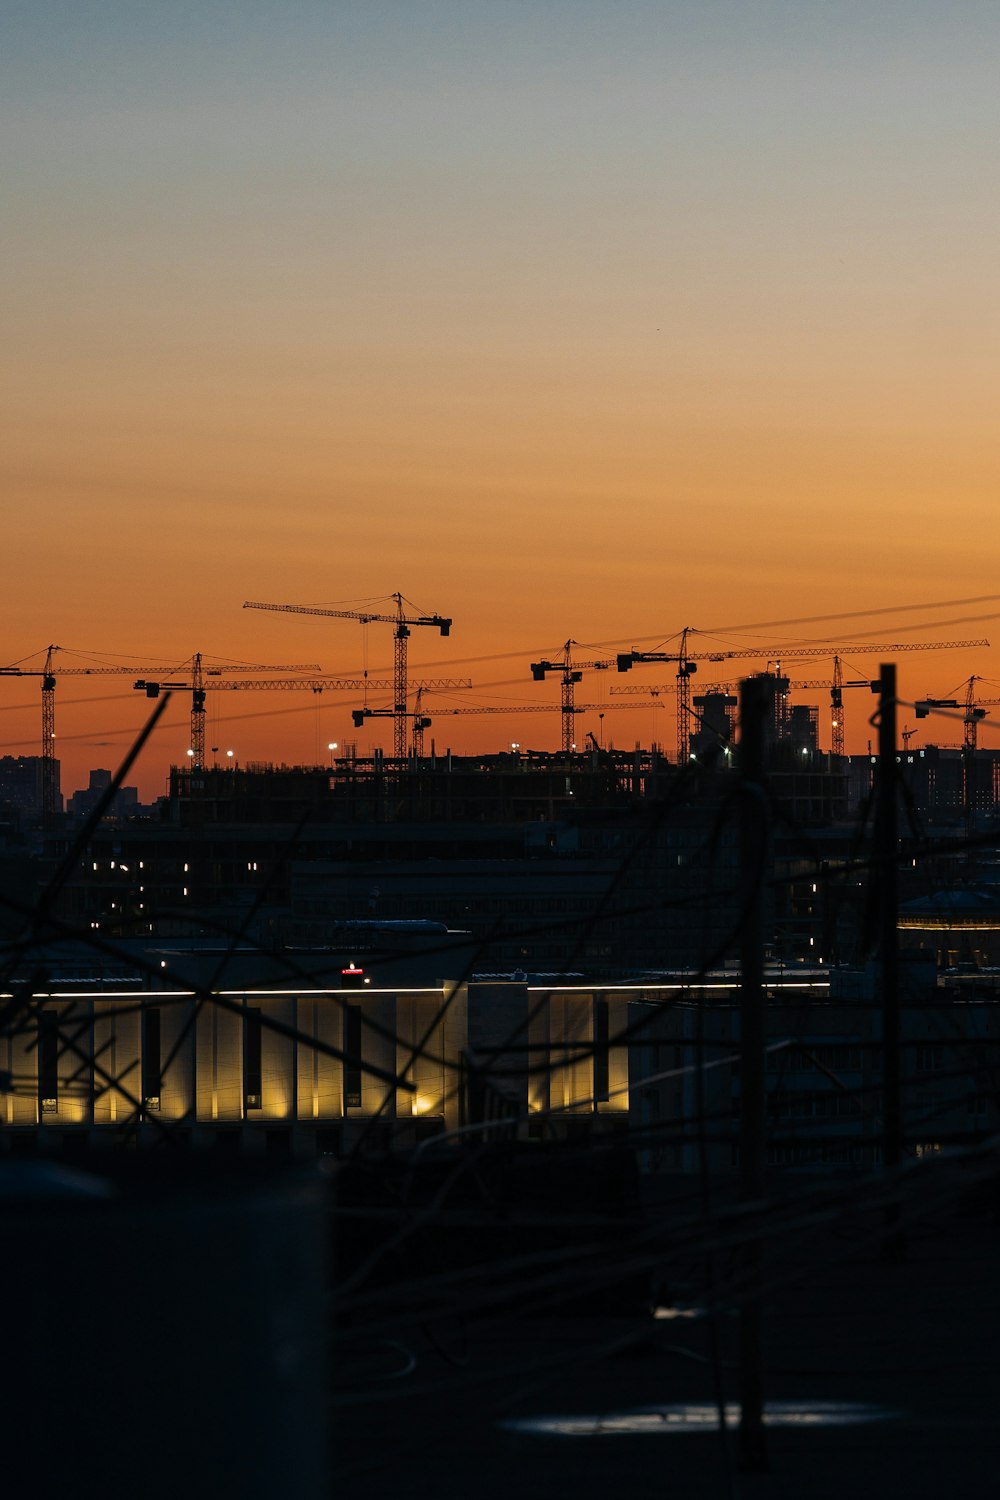 a sunset view of a city with cranes in the background